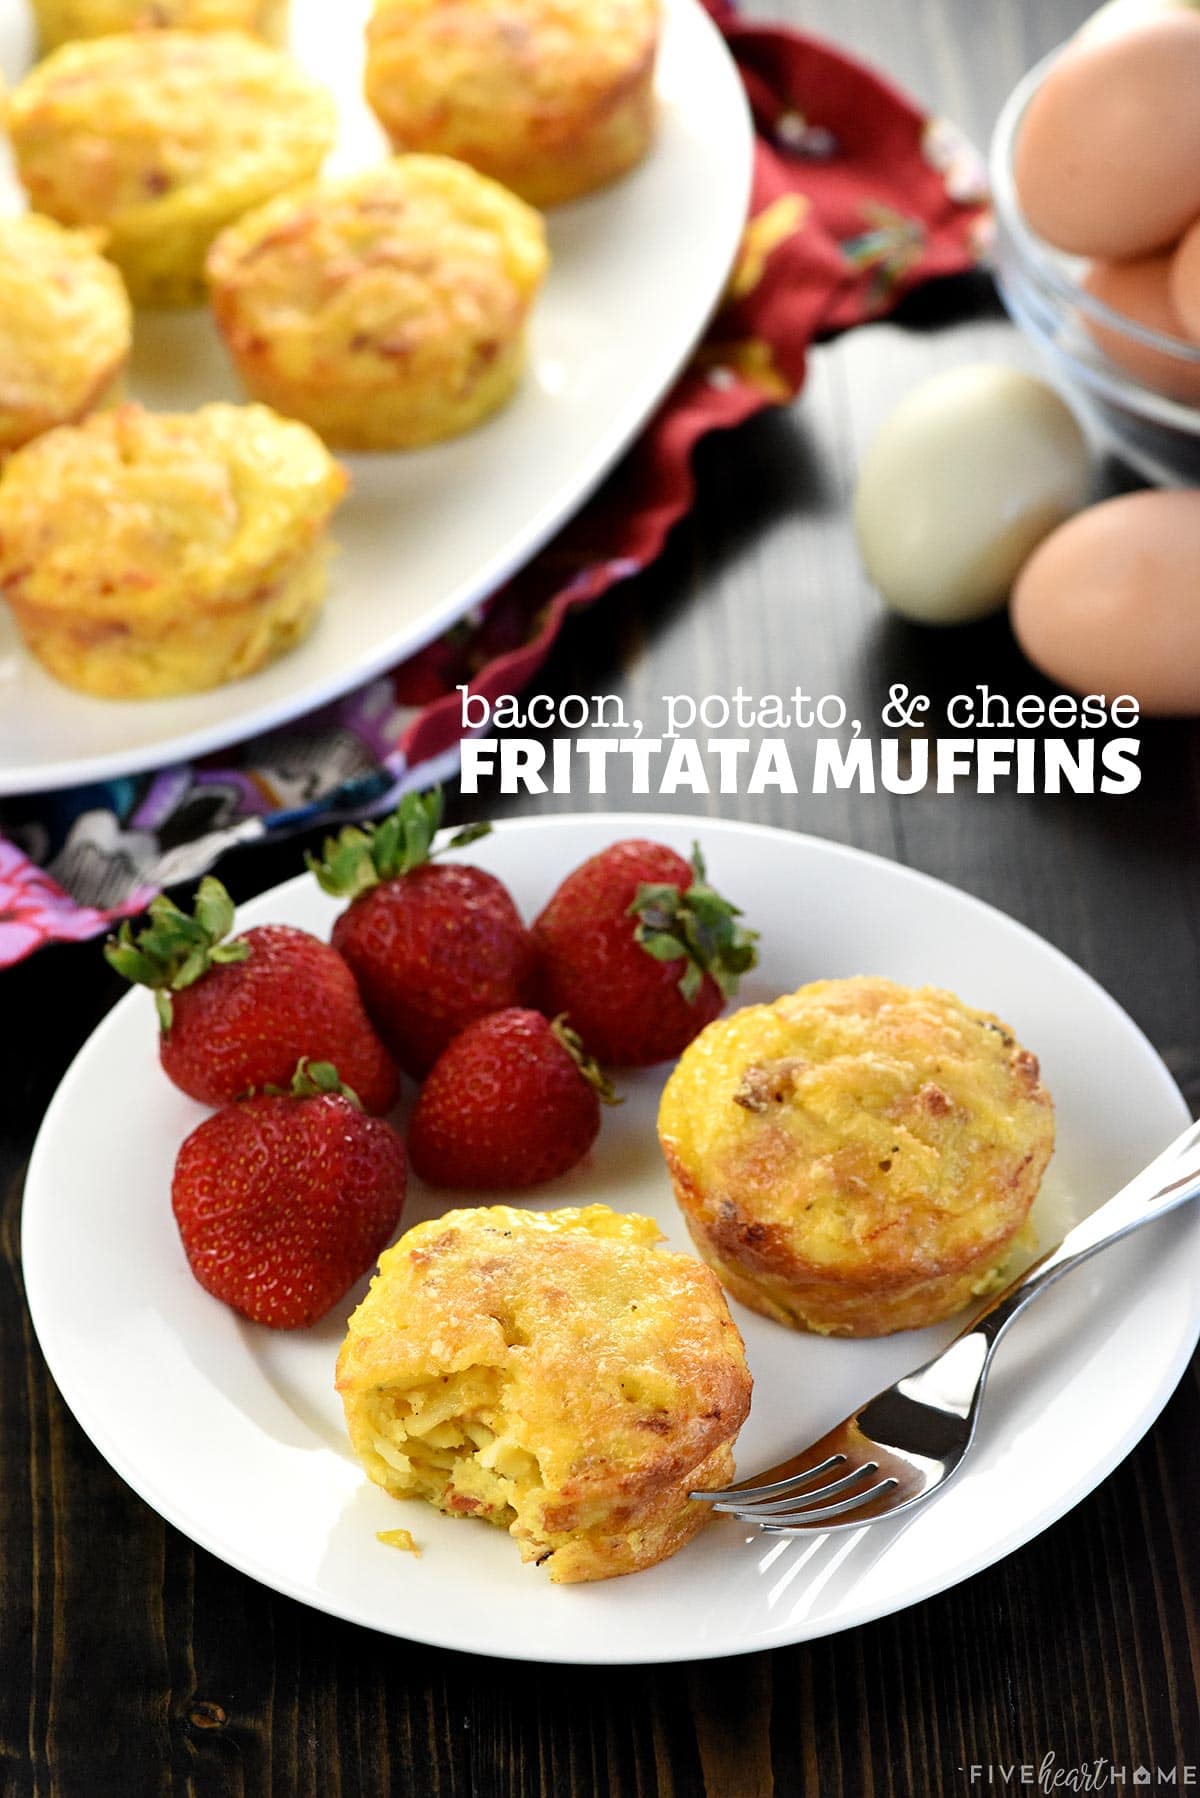 Fritta Muffins with text overlay.